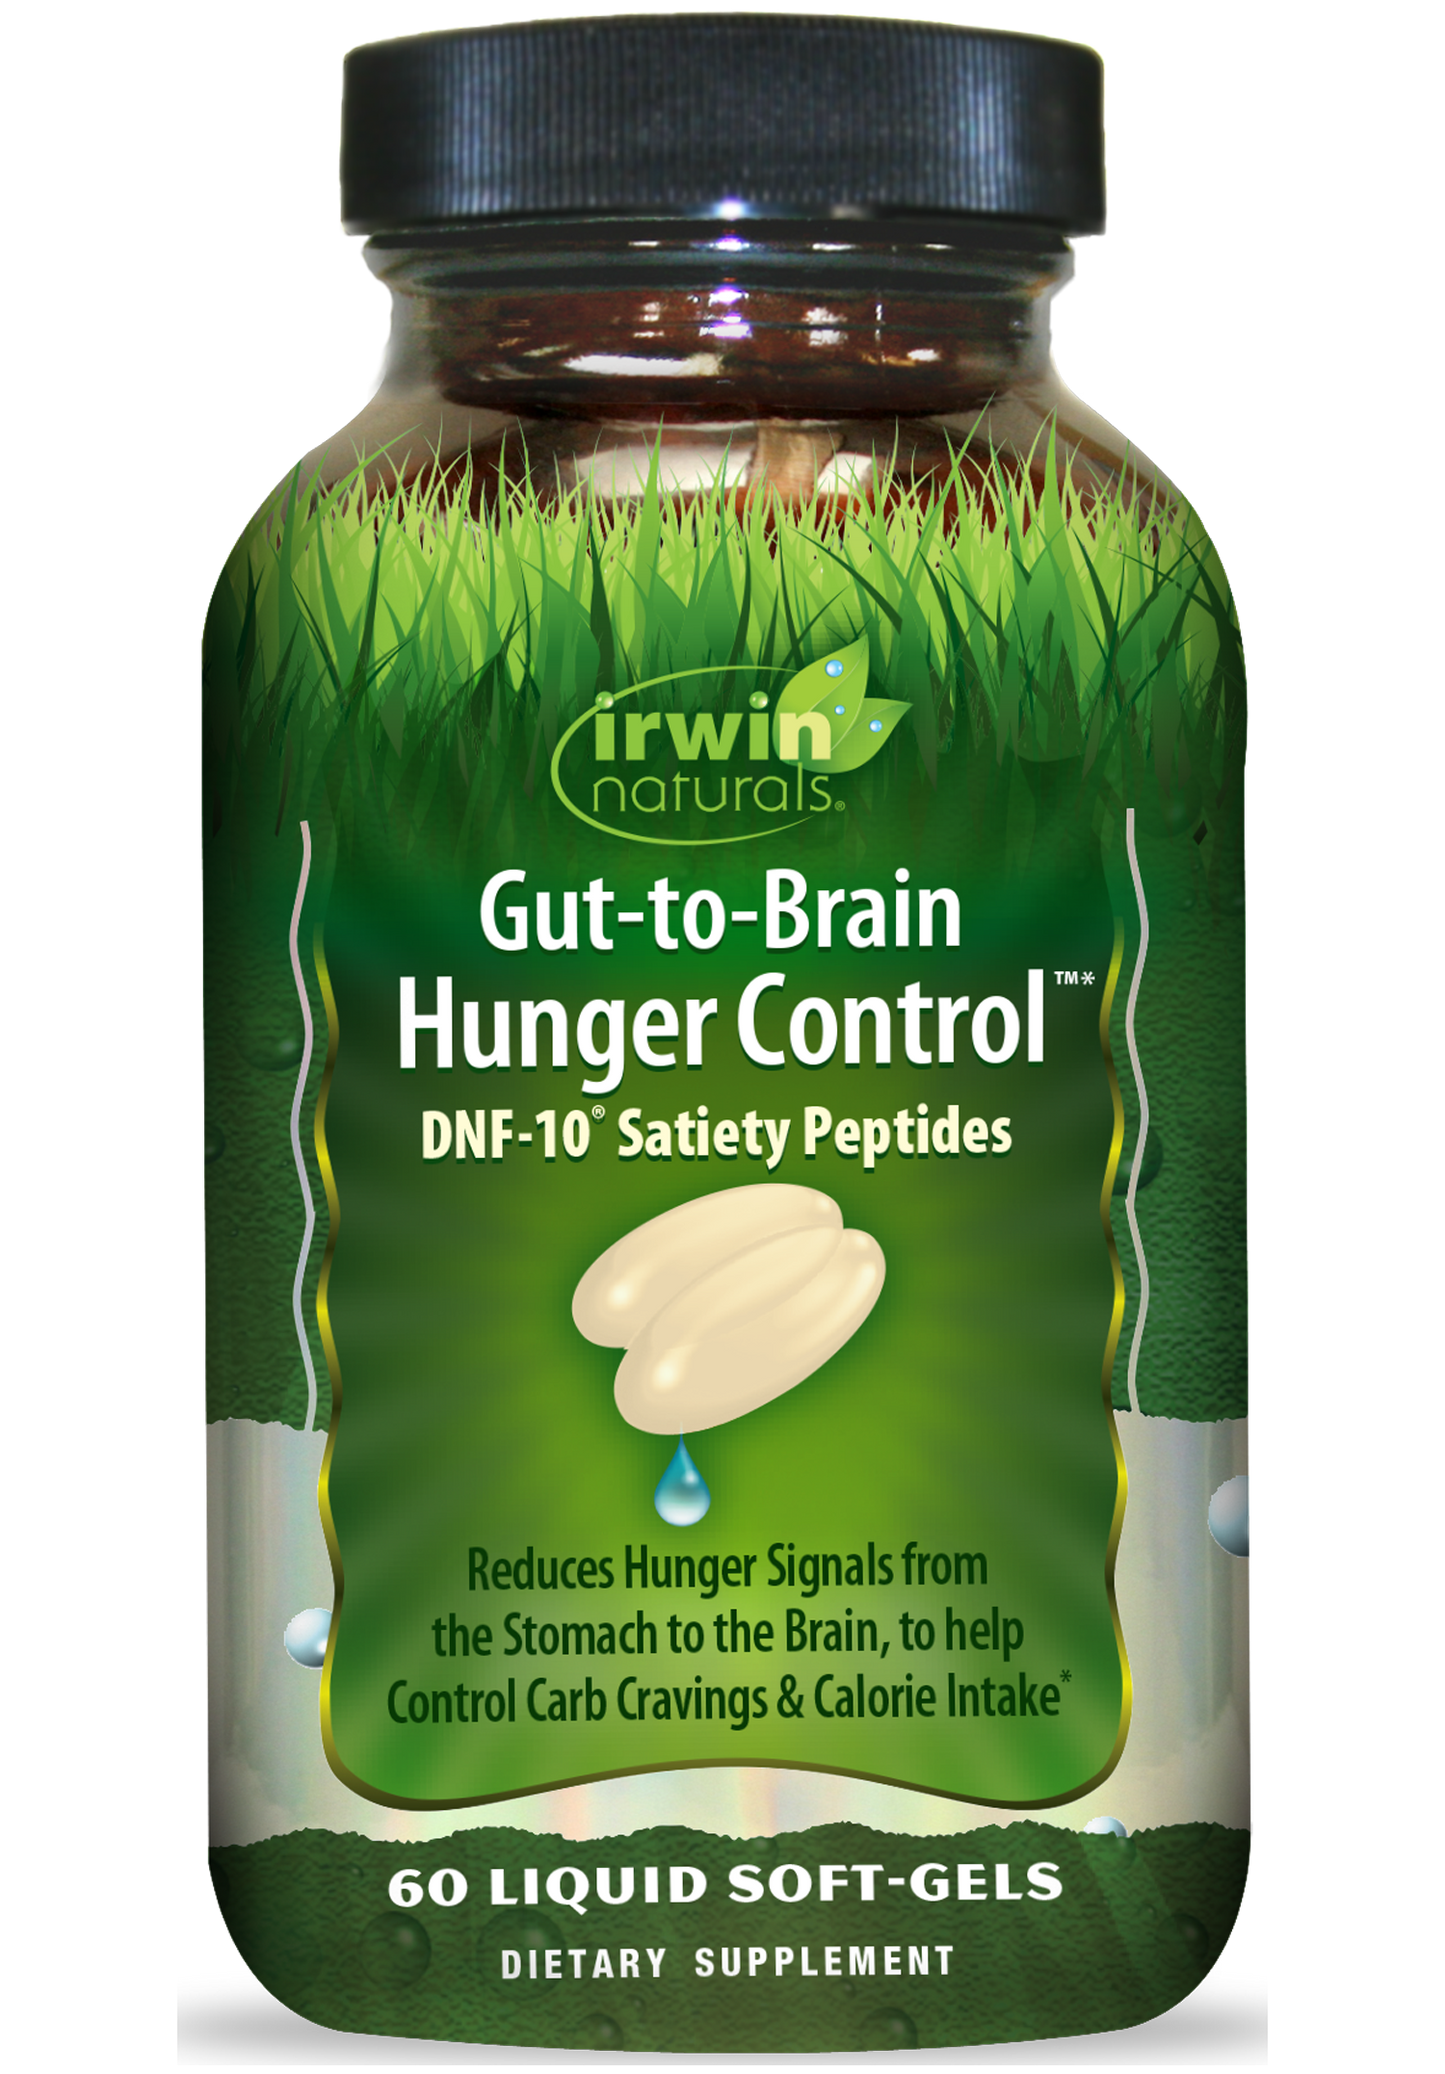 Natural hunger control supplements